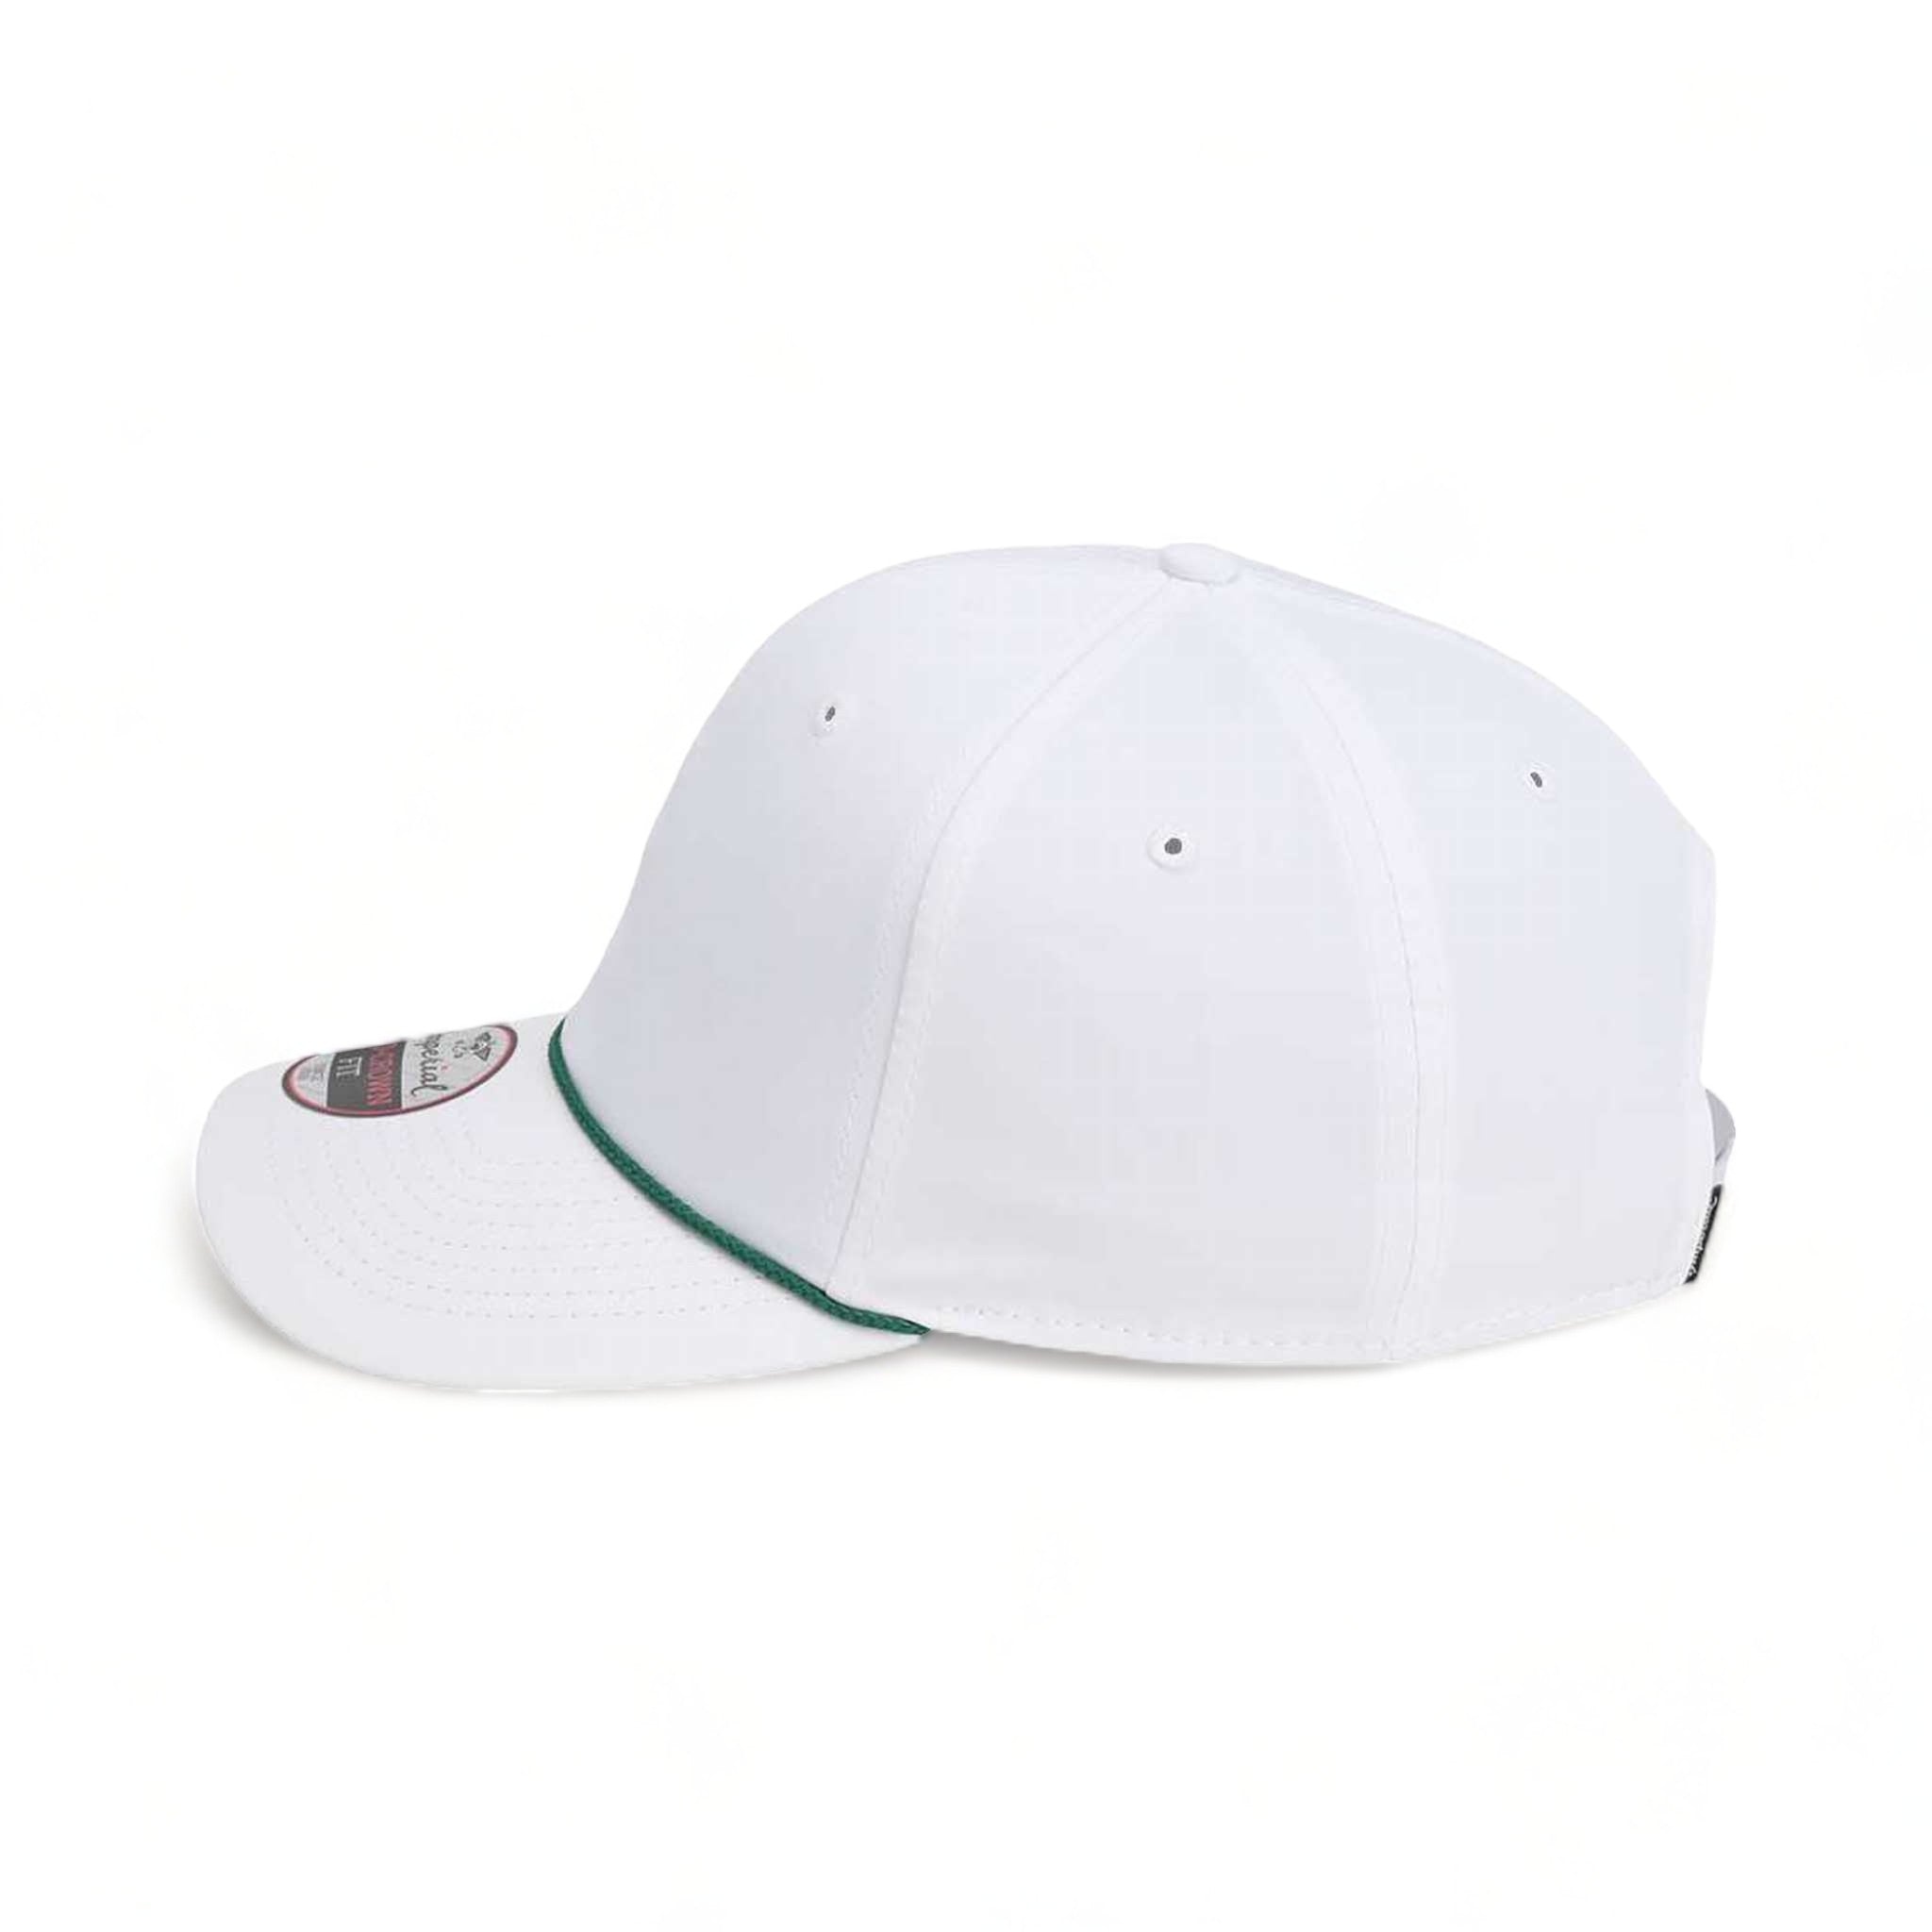 Side view of Imperial 7054 custom hat in white and dark green